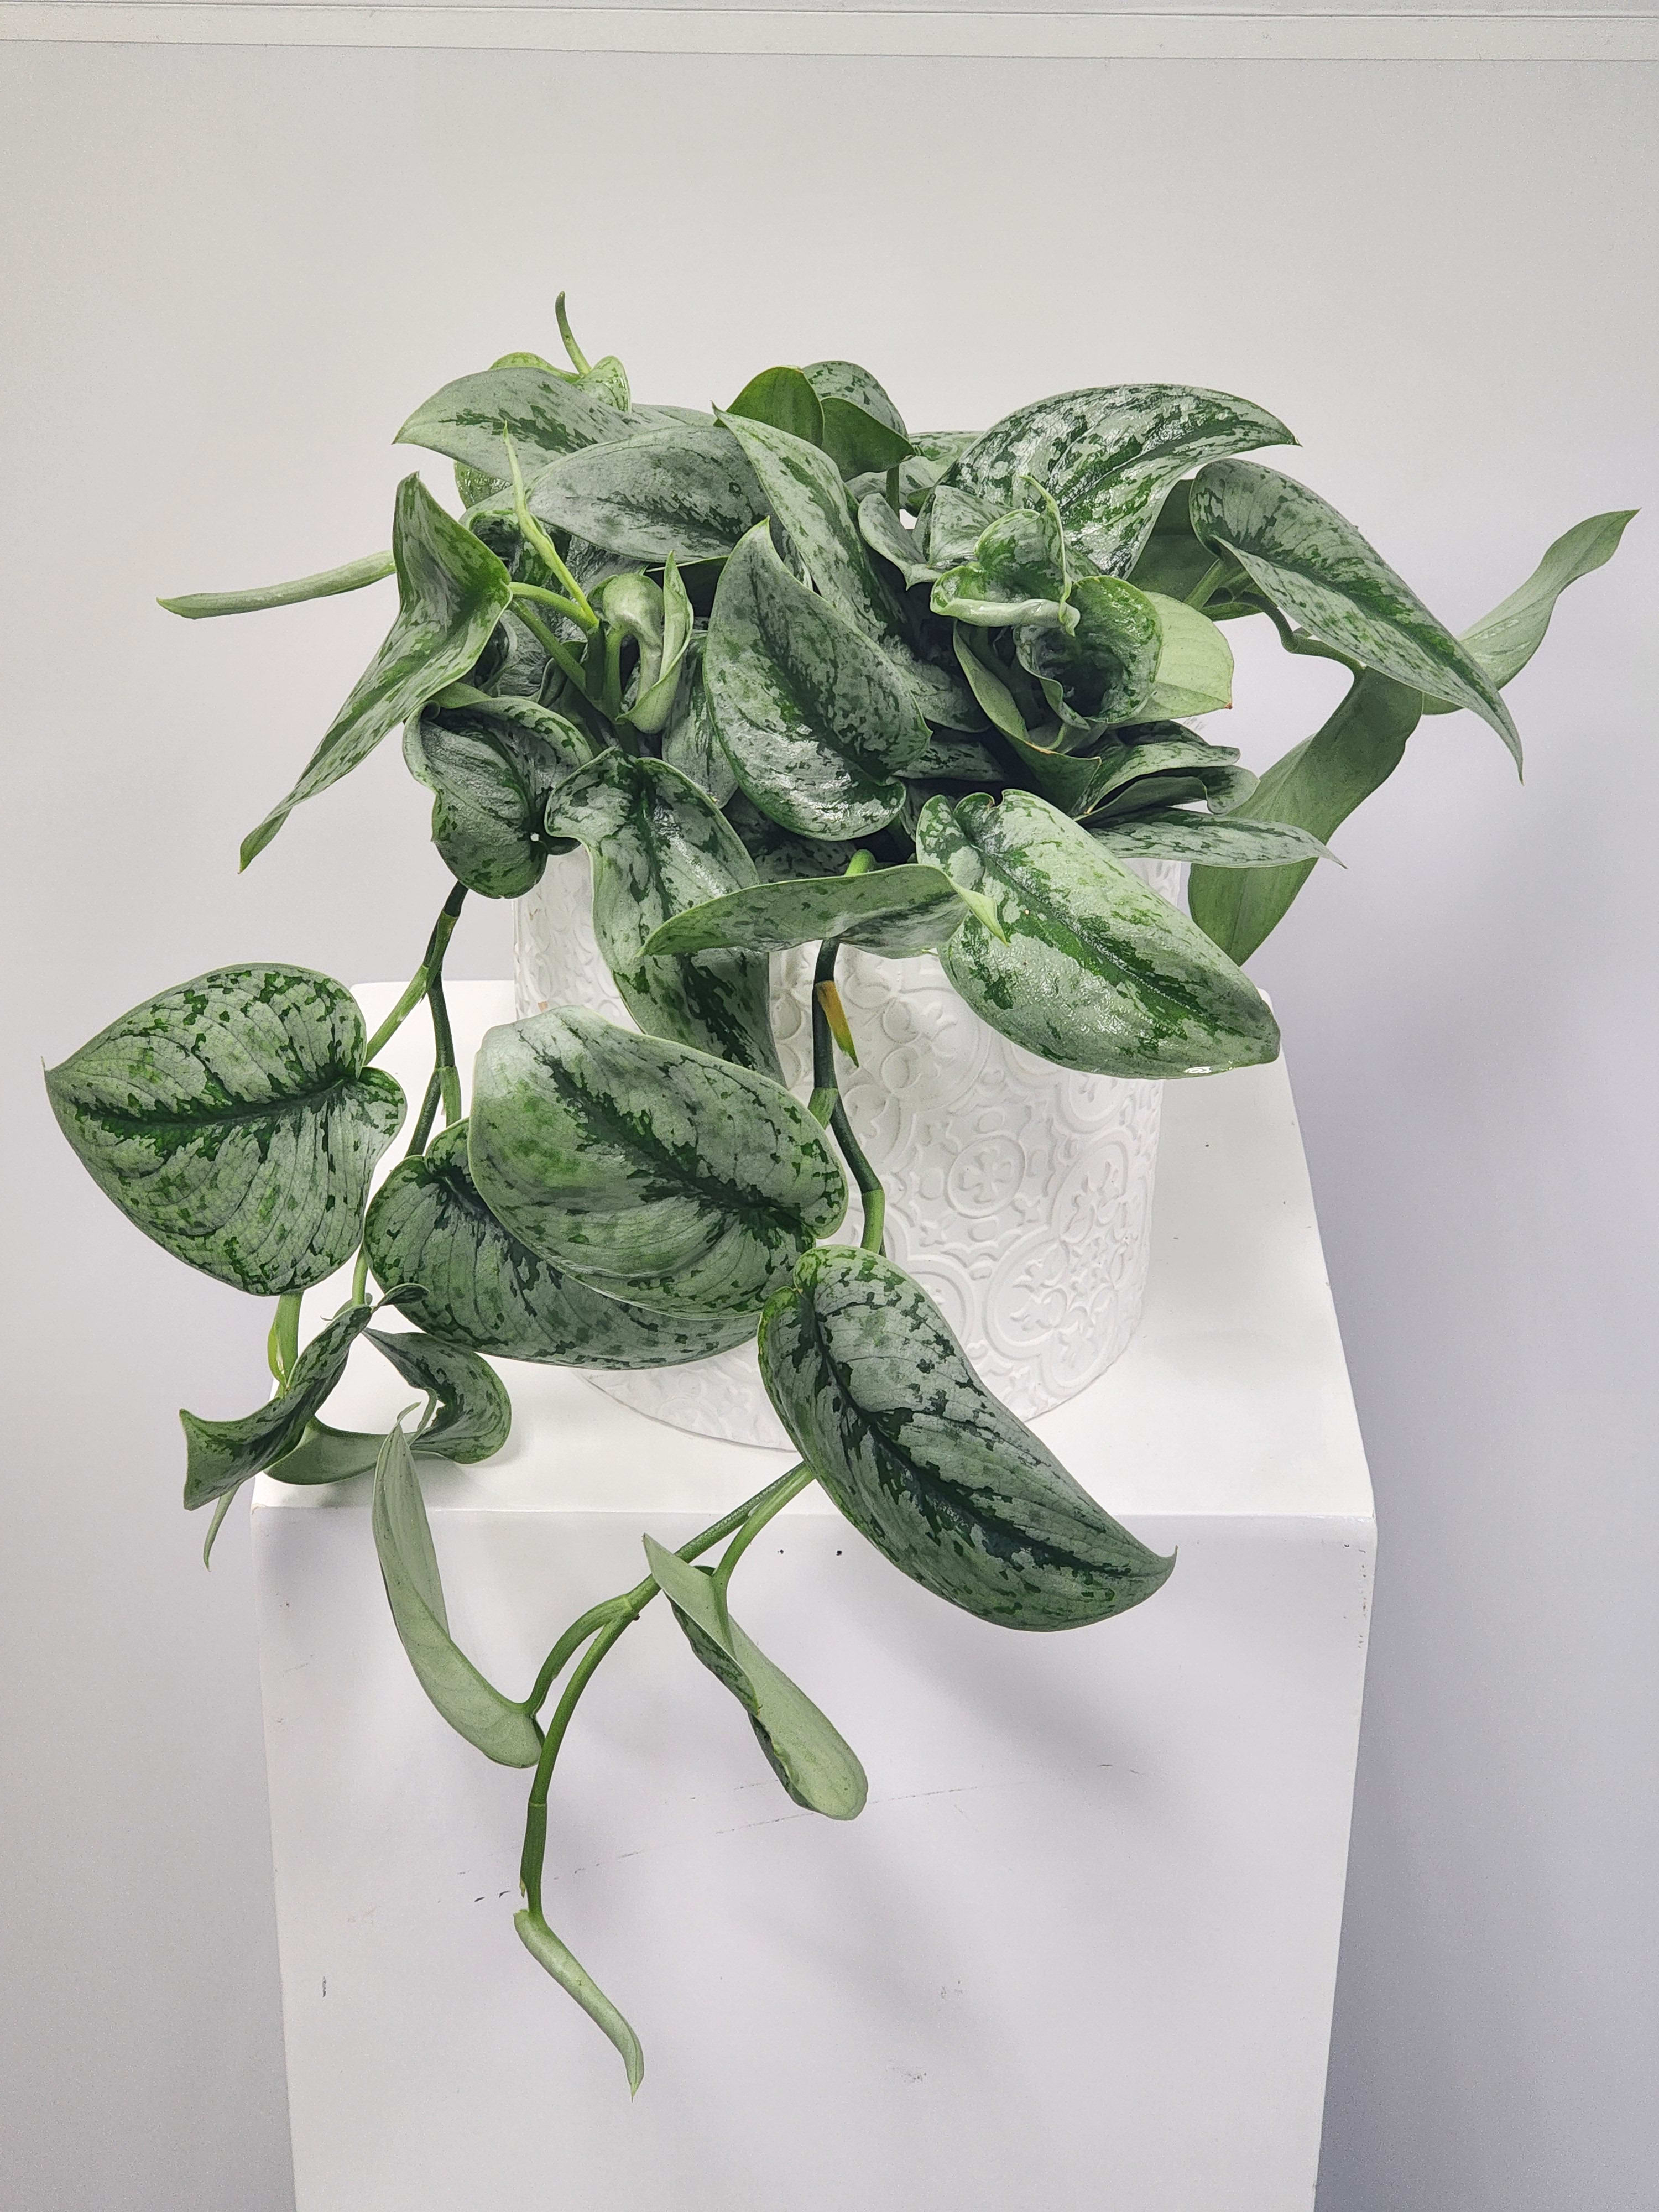 6&quot; Silver Satin Pothos Plant - Select this unique variety of pothos perfect for any occasion. This silver satin pothos lives up to its name, having a soft satin-like texture with beautiful silver variegation.